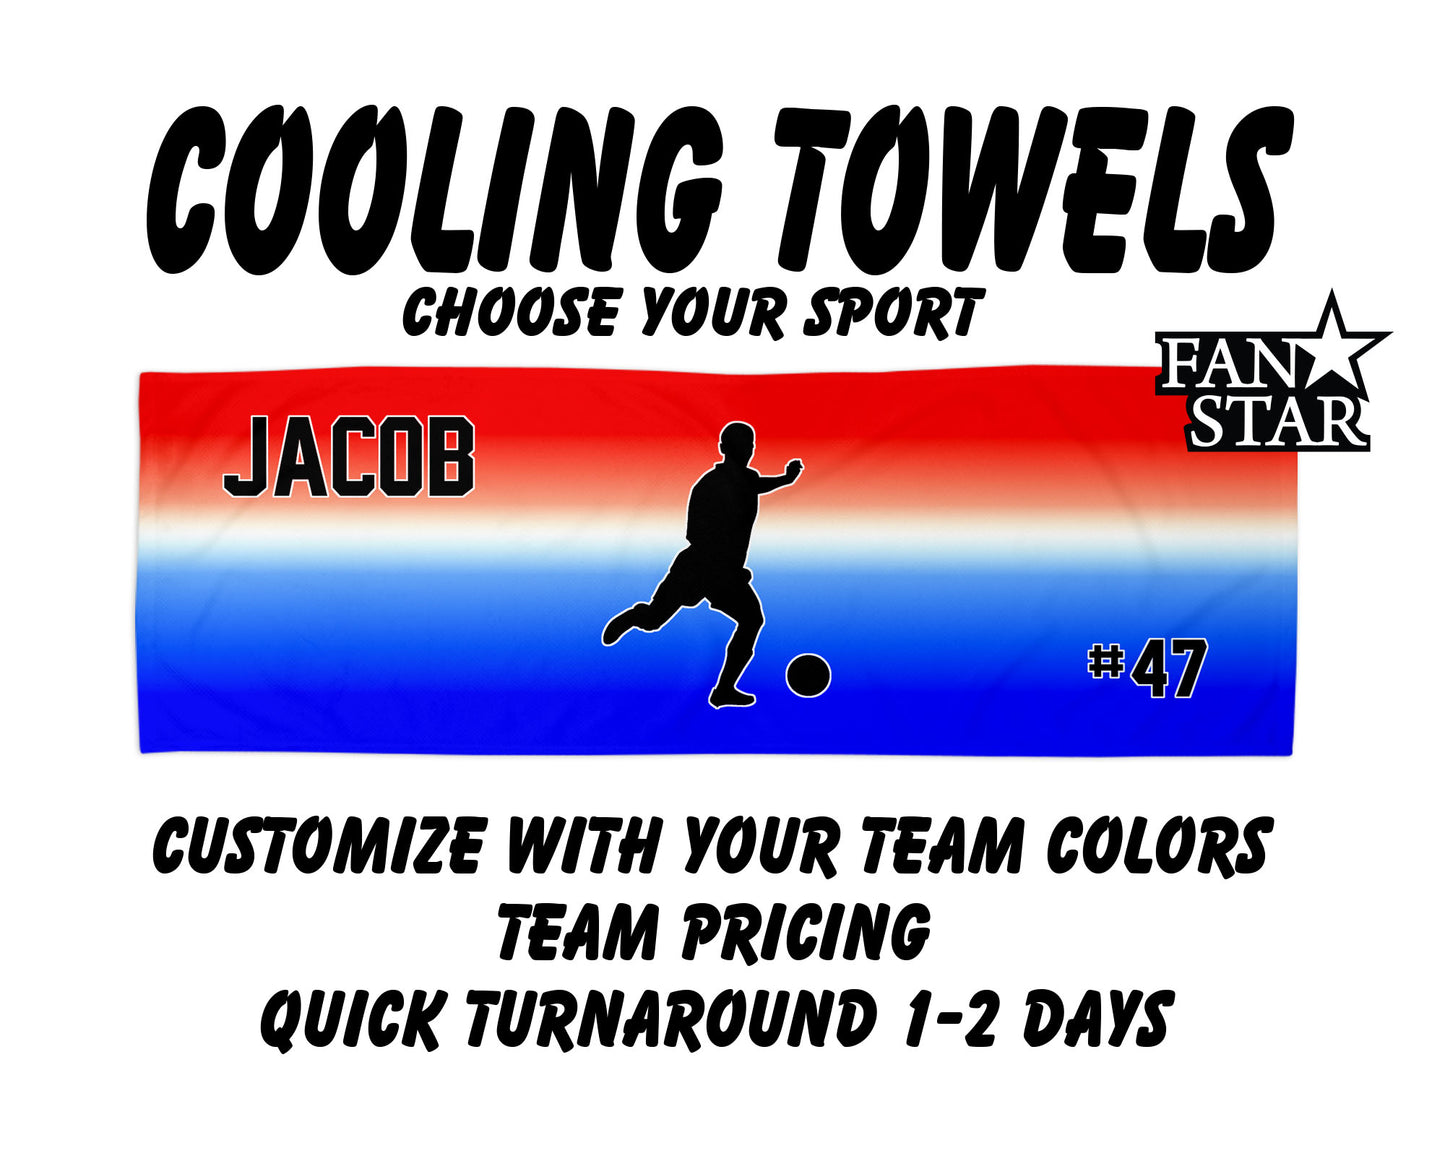 Soccer Cooling Towel with Ombre Background